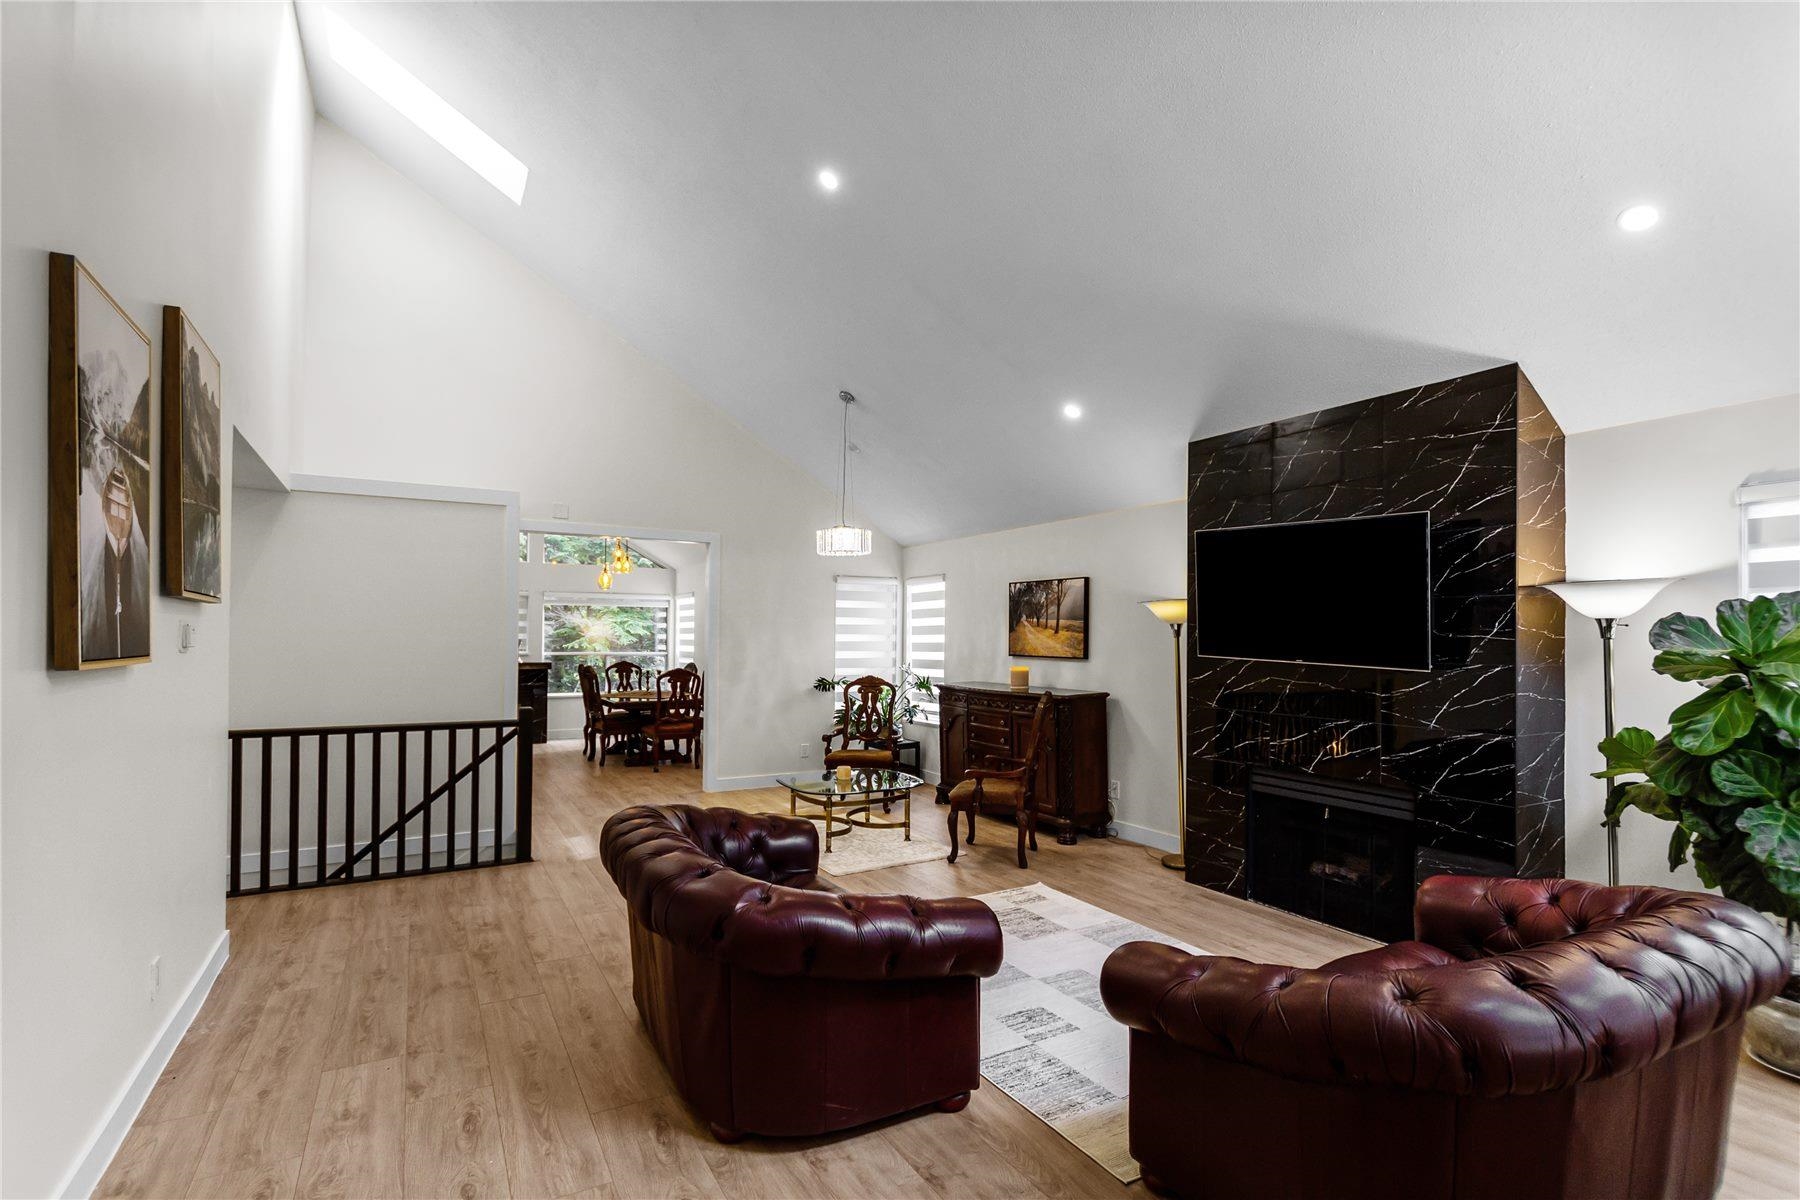 Listing image of 41 4055 INDIAN RIVER DRIVE